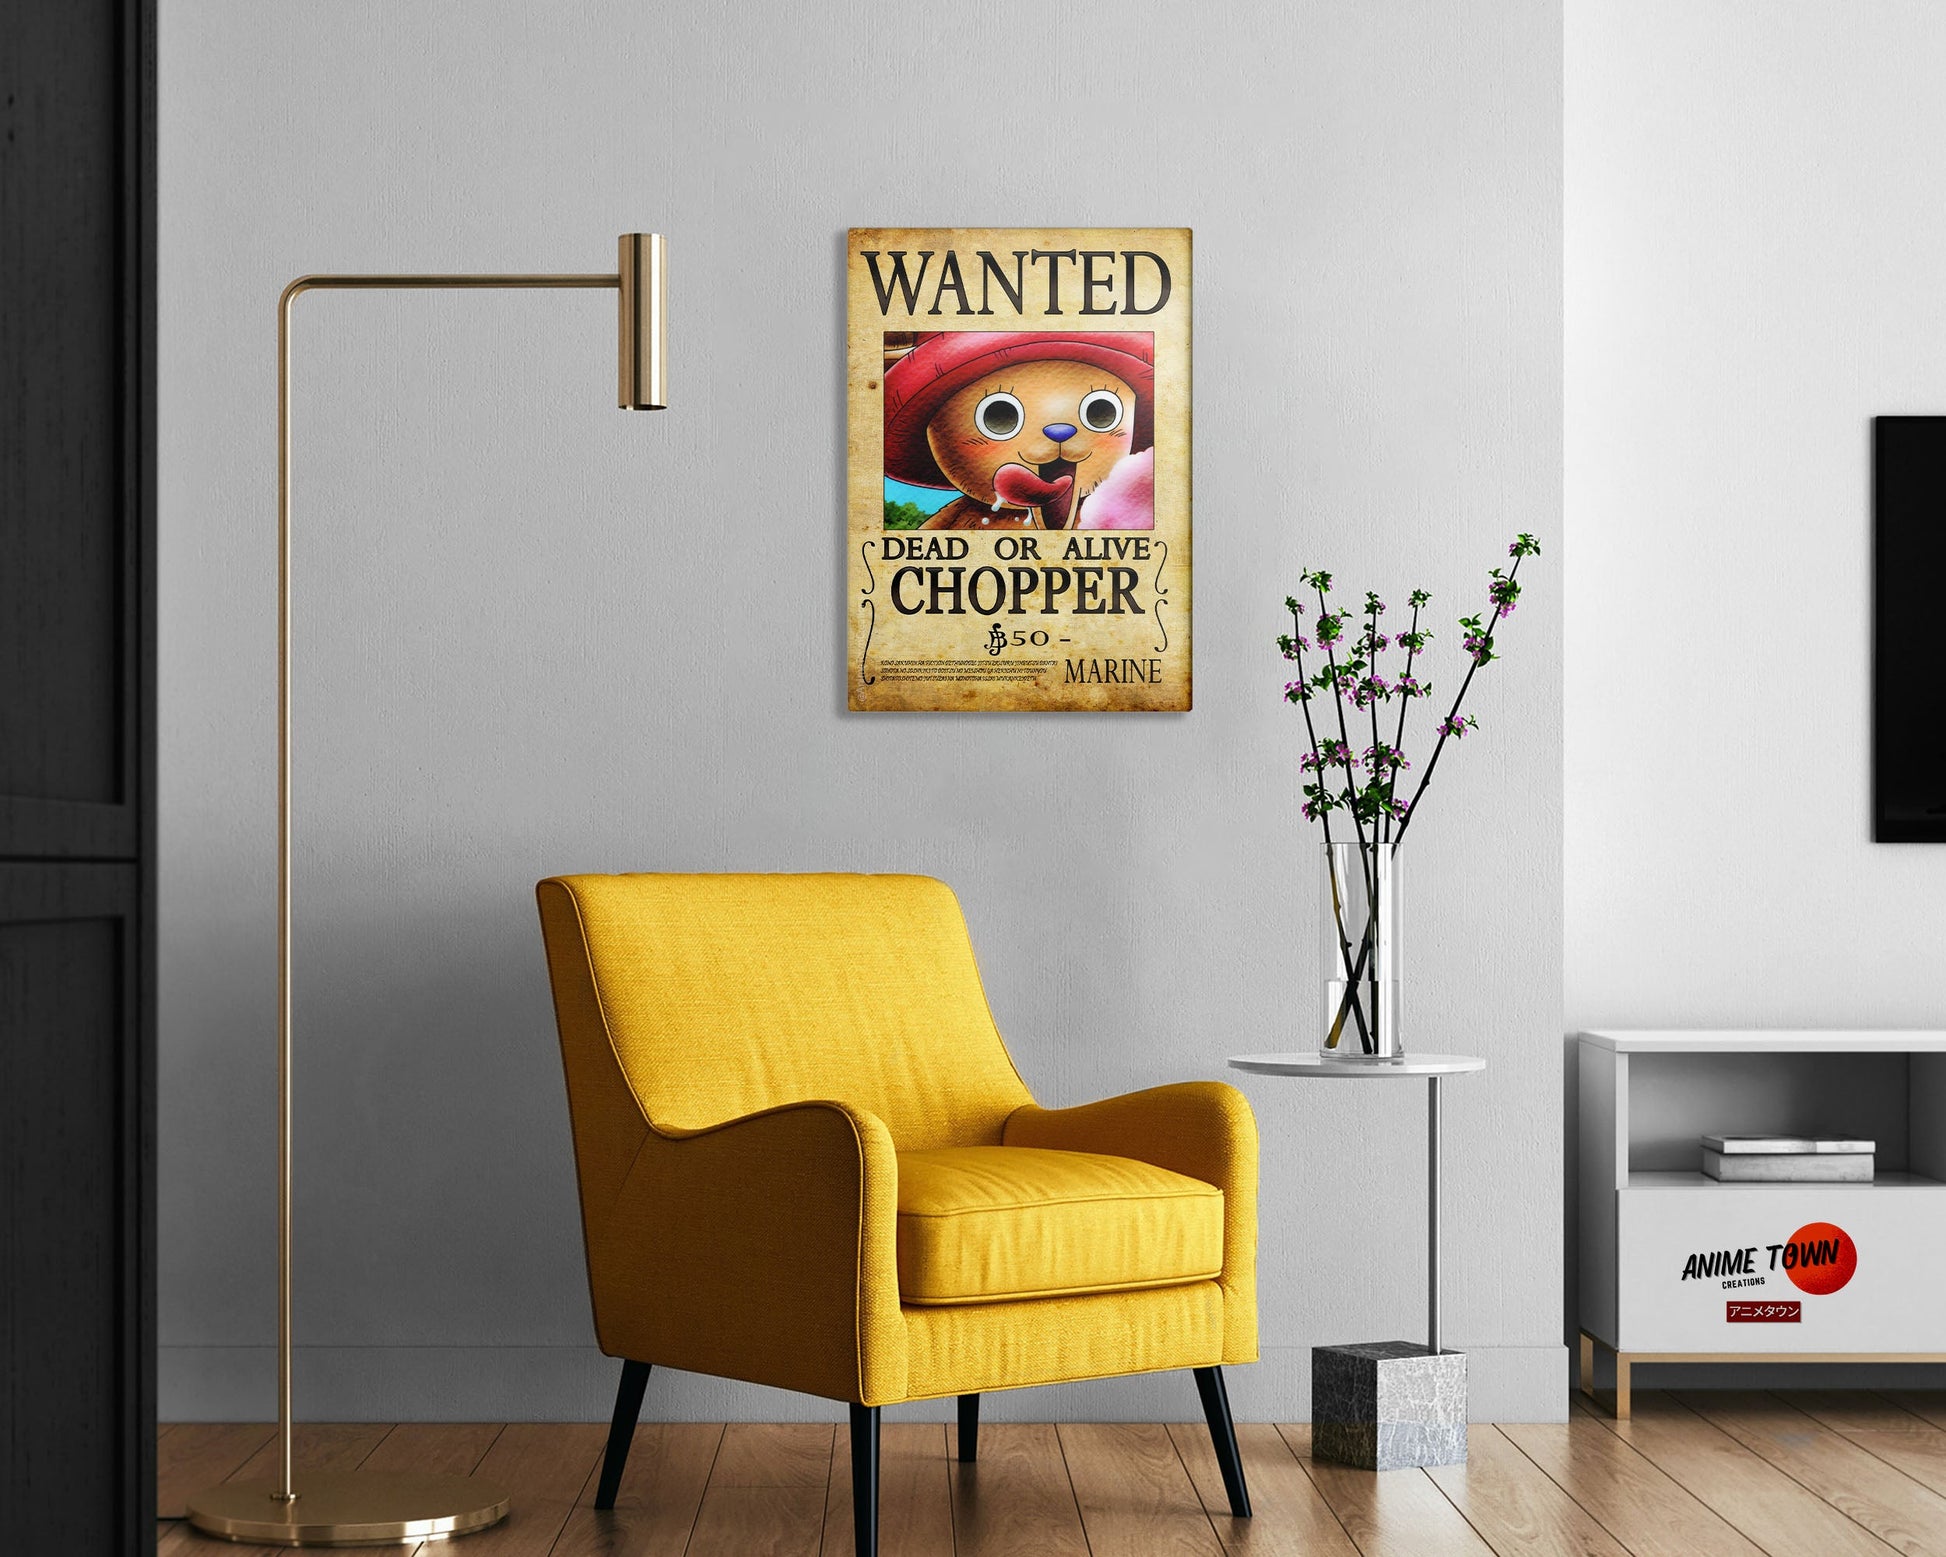 Anime Town Creations Metal Poster One Piece Chopper Wanted Poster 5" x 7" Home Goods - Anime One Piece Metal Poster